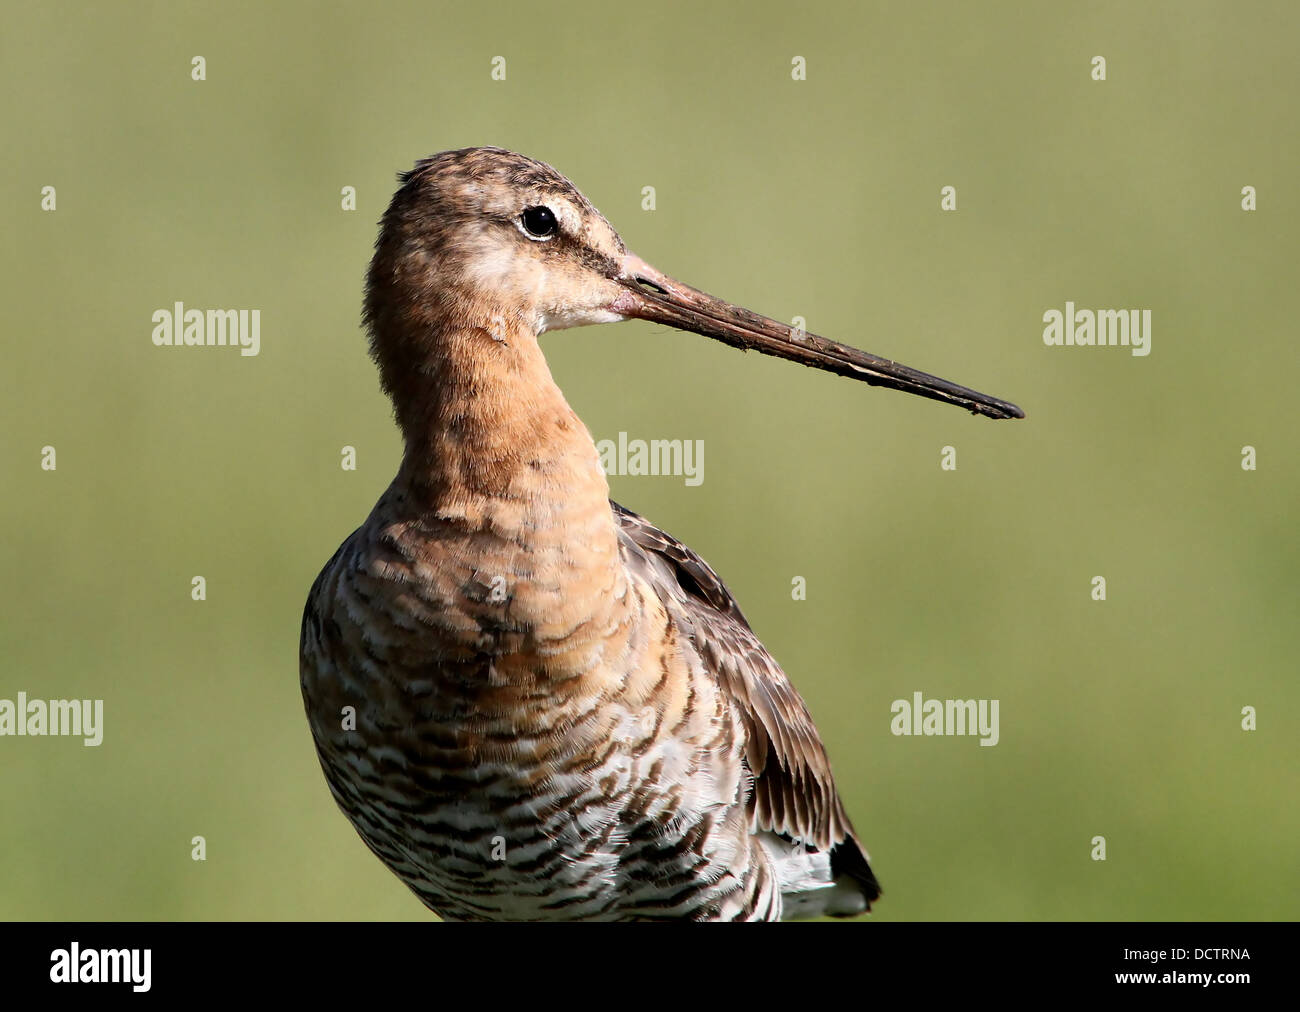 Extremely detailed crop  of the head and bill of a Black-tailed Godwit (Limosa limosa)  posing on a pole Stock Photo